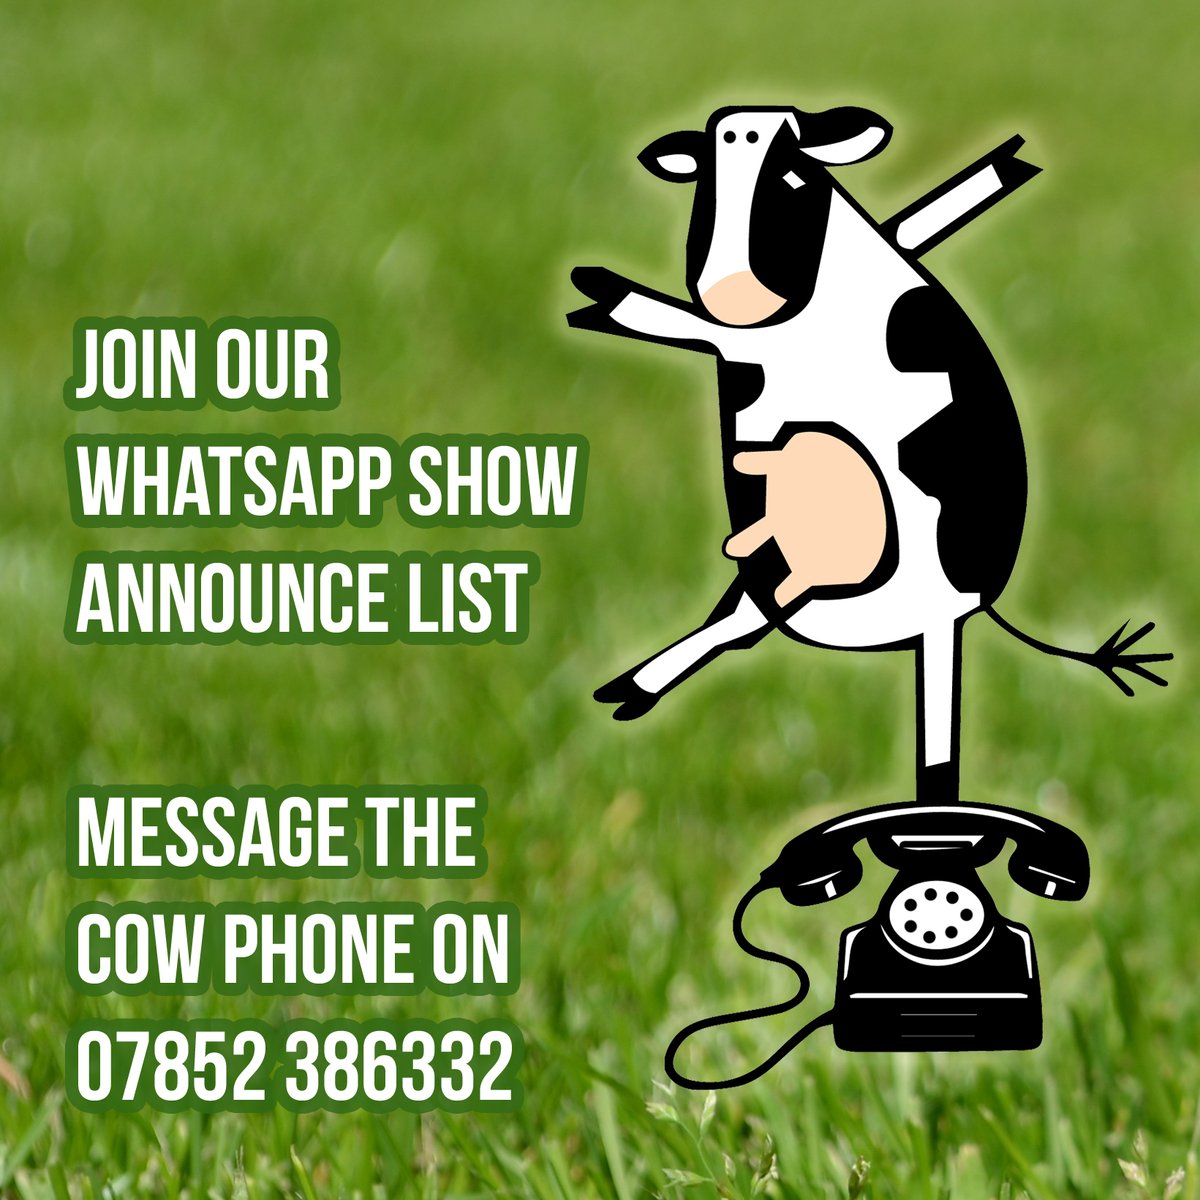 Join our new WhatsApp show announce list to be the first in the know about next years shows. Message the cow phone on O7852 386332 to join, or click this link api.whatsapp.com/send/?phone=%2… #latestmoos #cowphone #cutoutthemoodleman #cowtastic